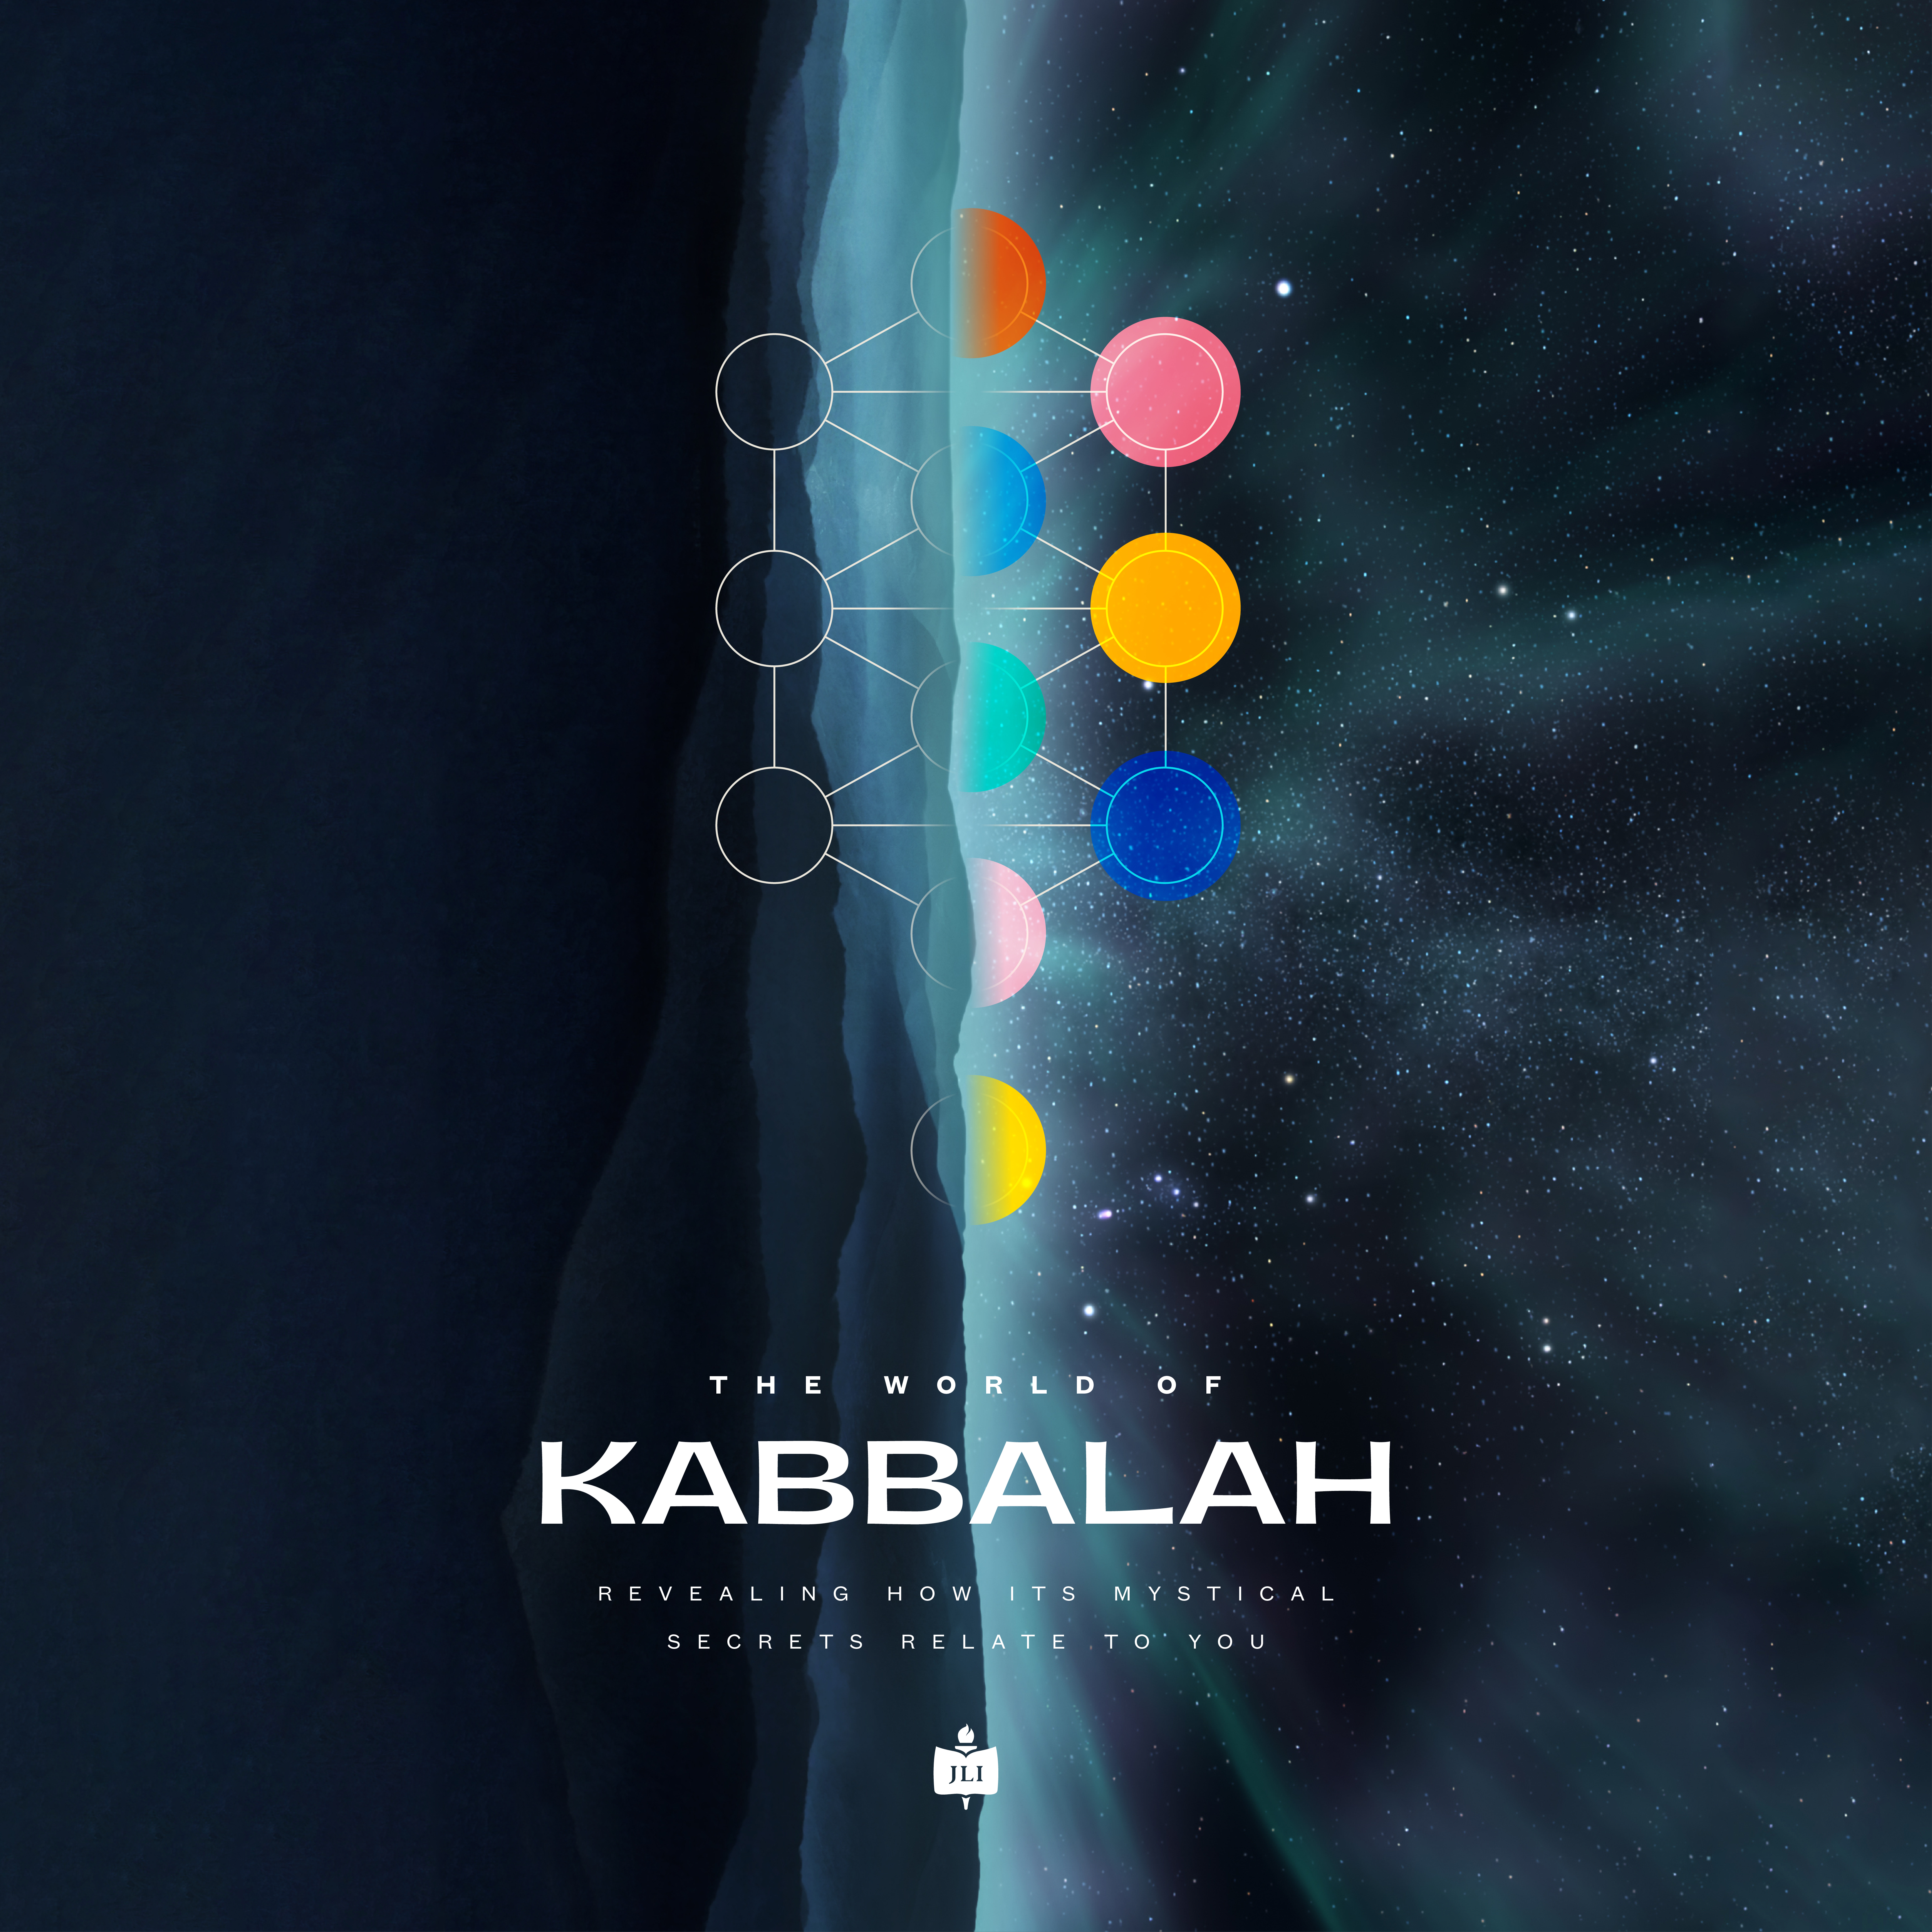 The World of Kabbalah:Revealing How Its Mystical Secrets Relate to You